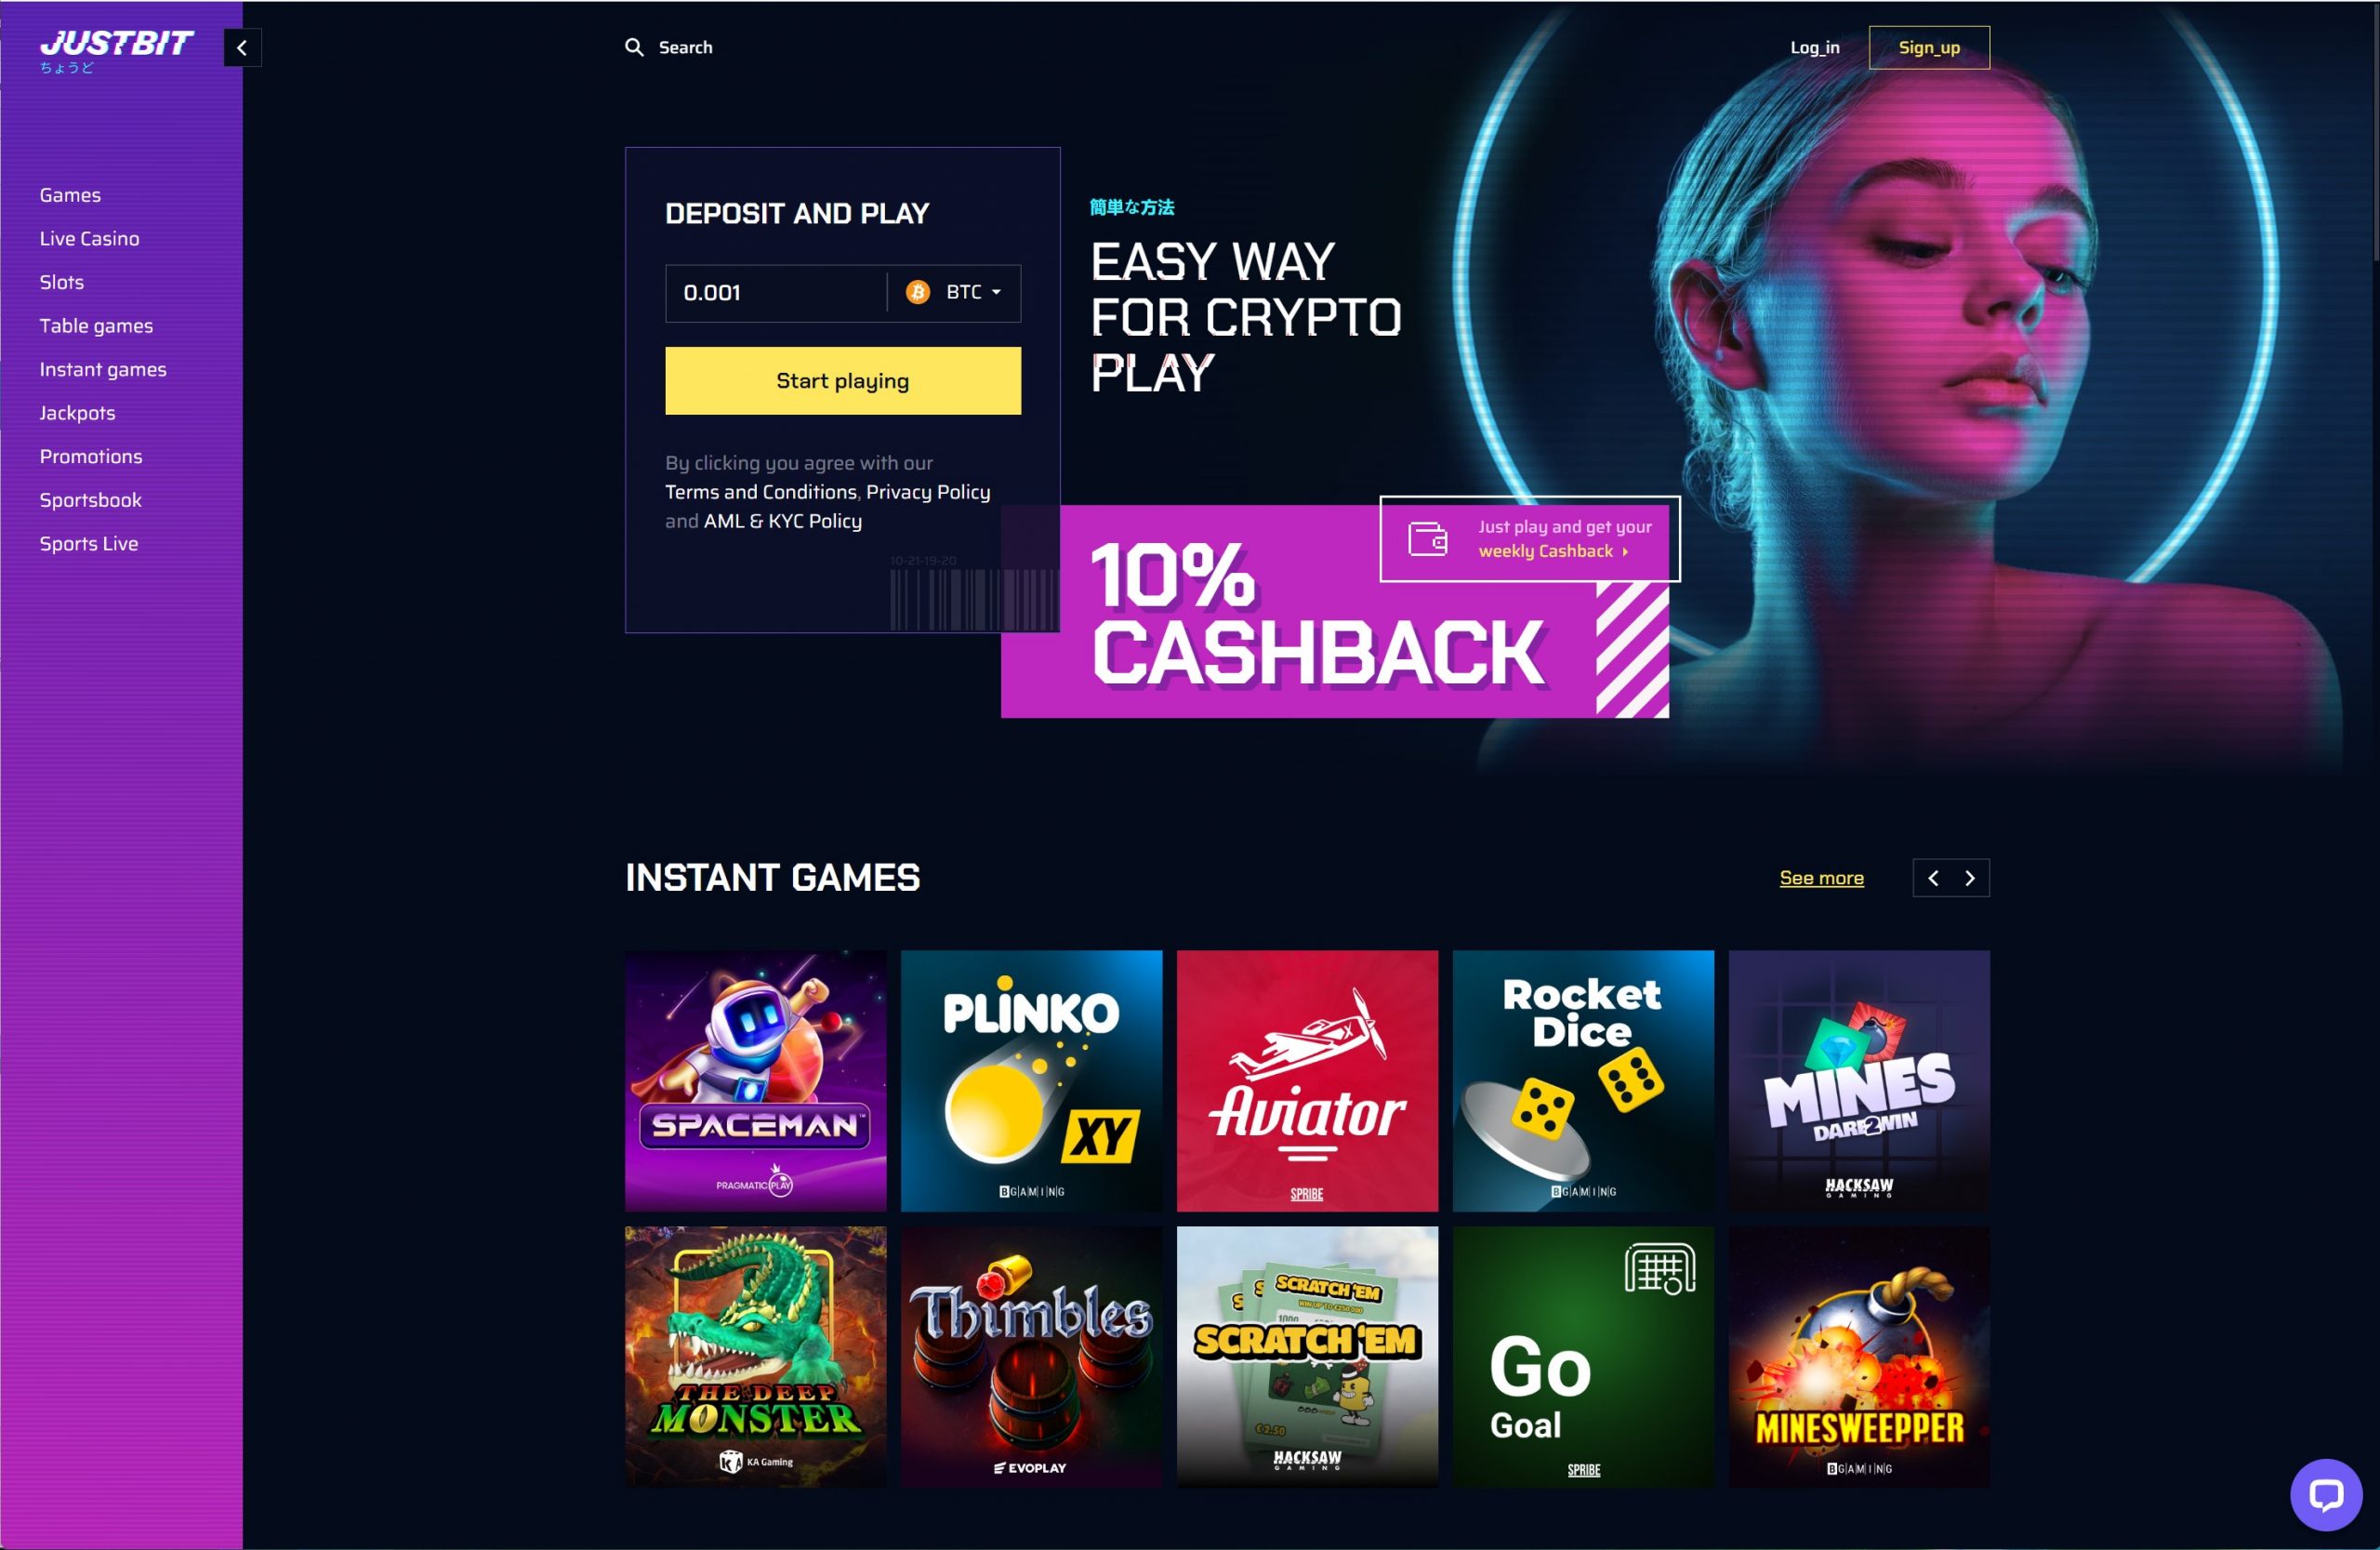 justbit casino review